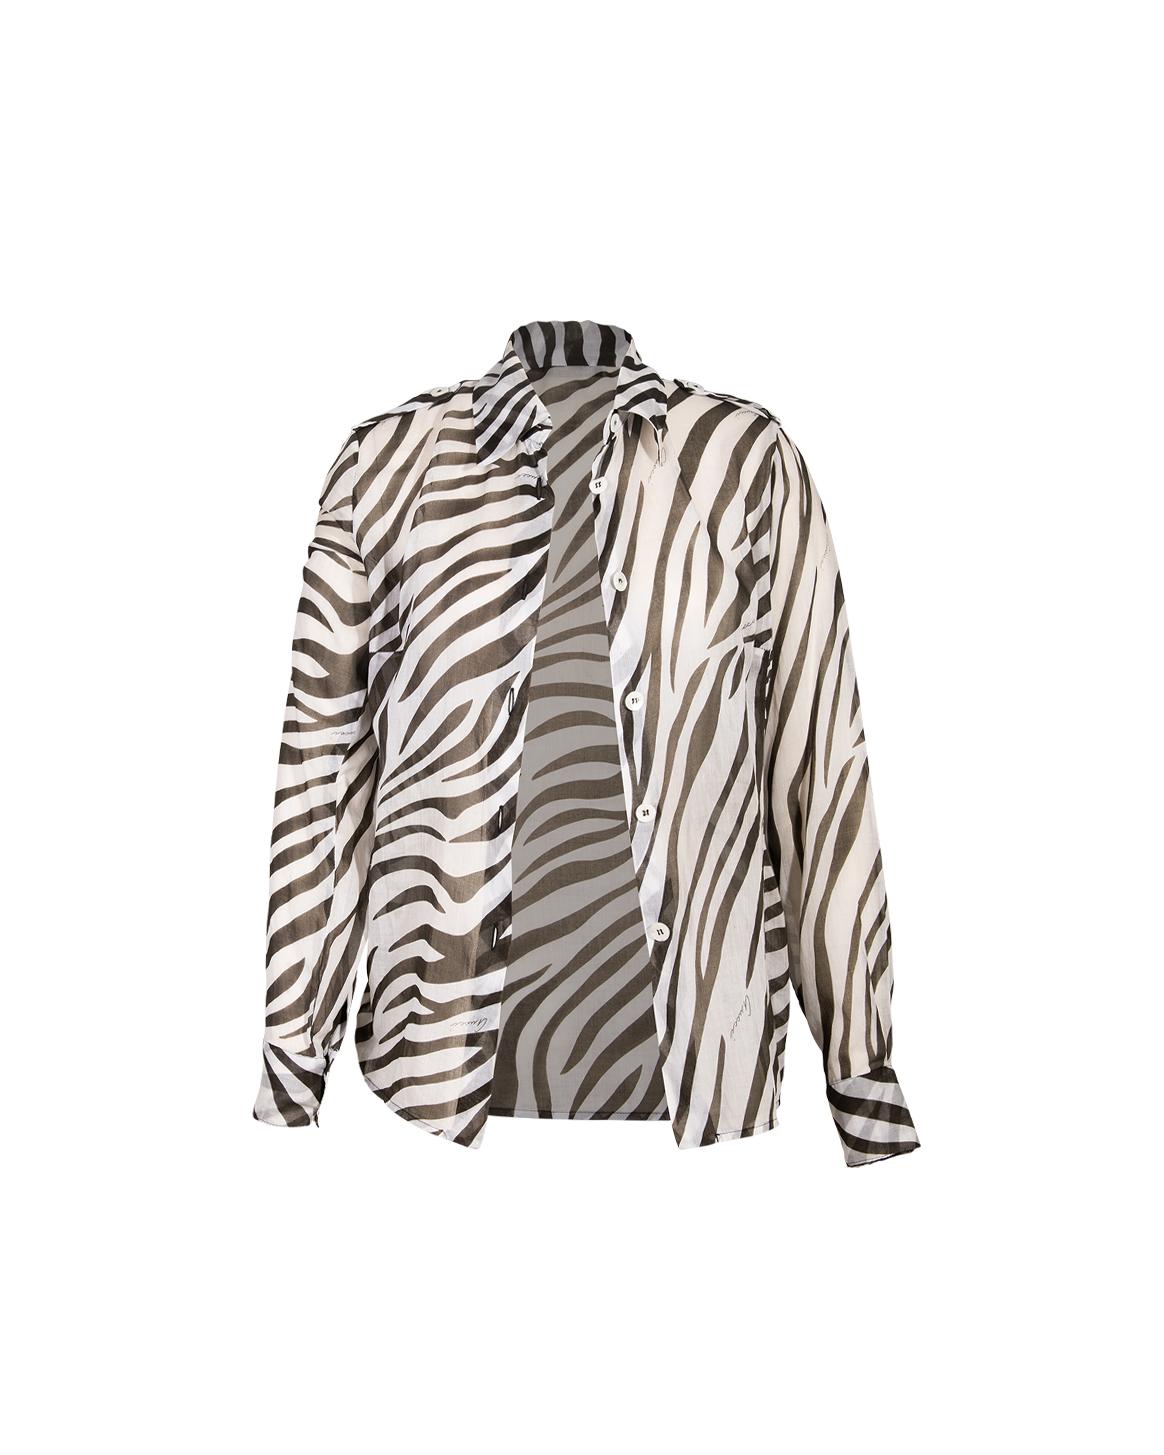 S/S 1996 Gucci by Tom Ford Zebra Print Cotton Top 1